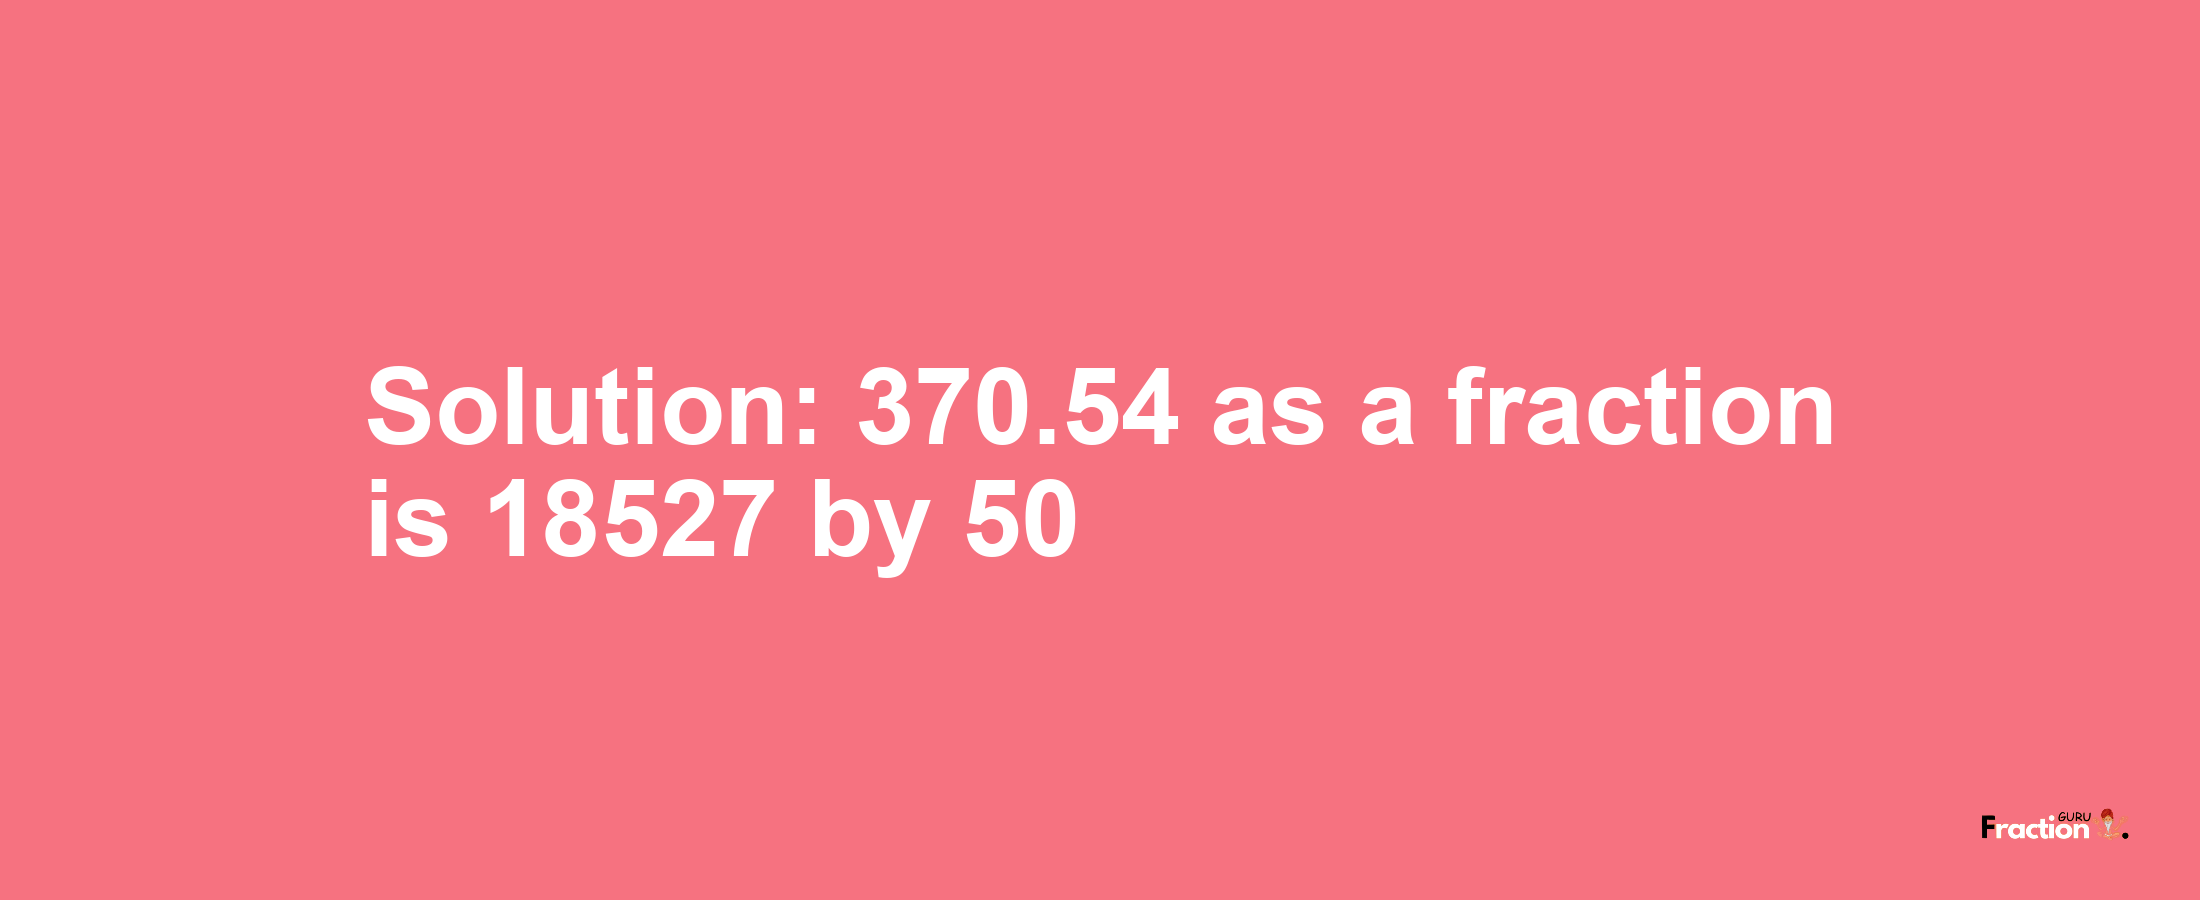 Solution:370.54 as a fraction is 18527/50